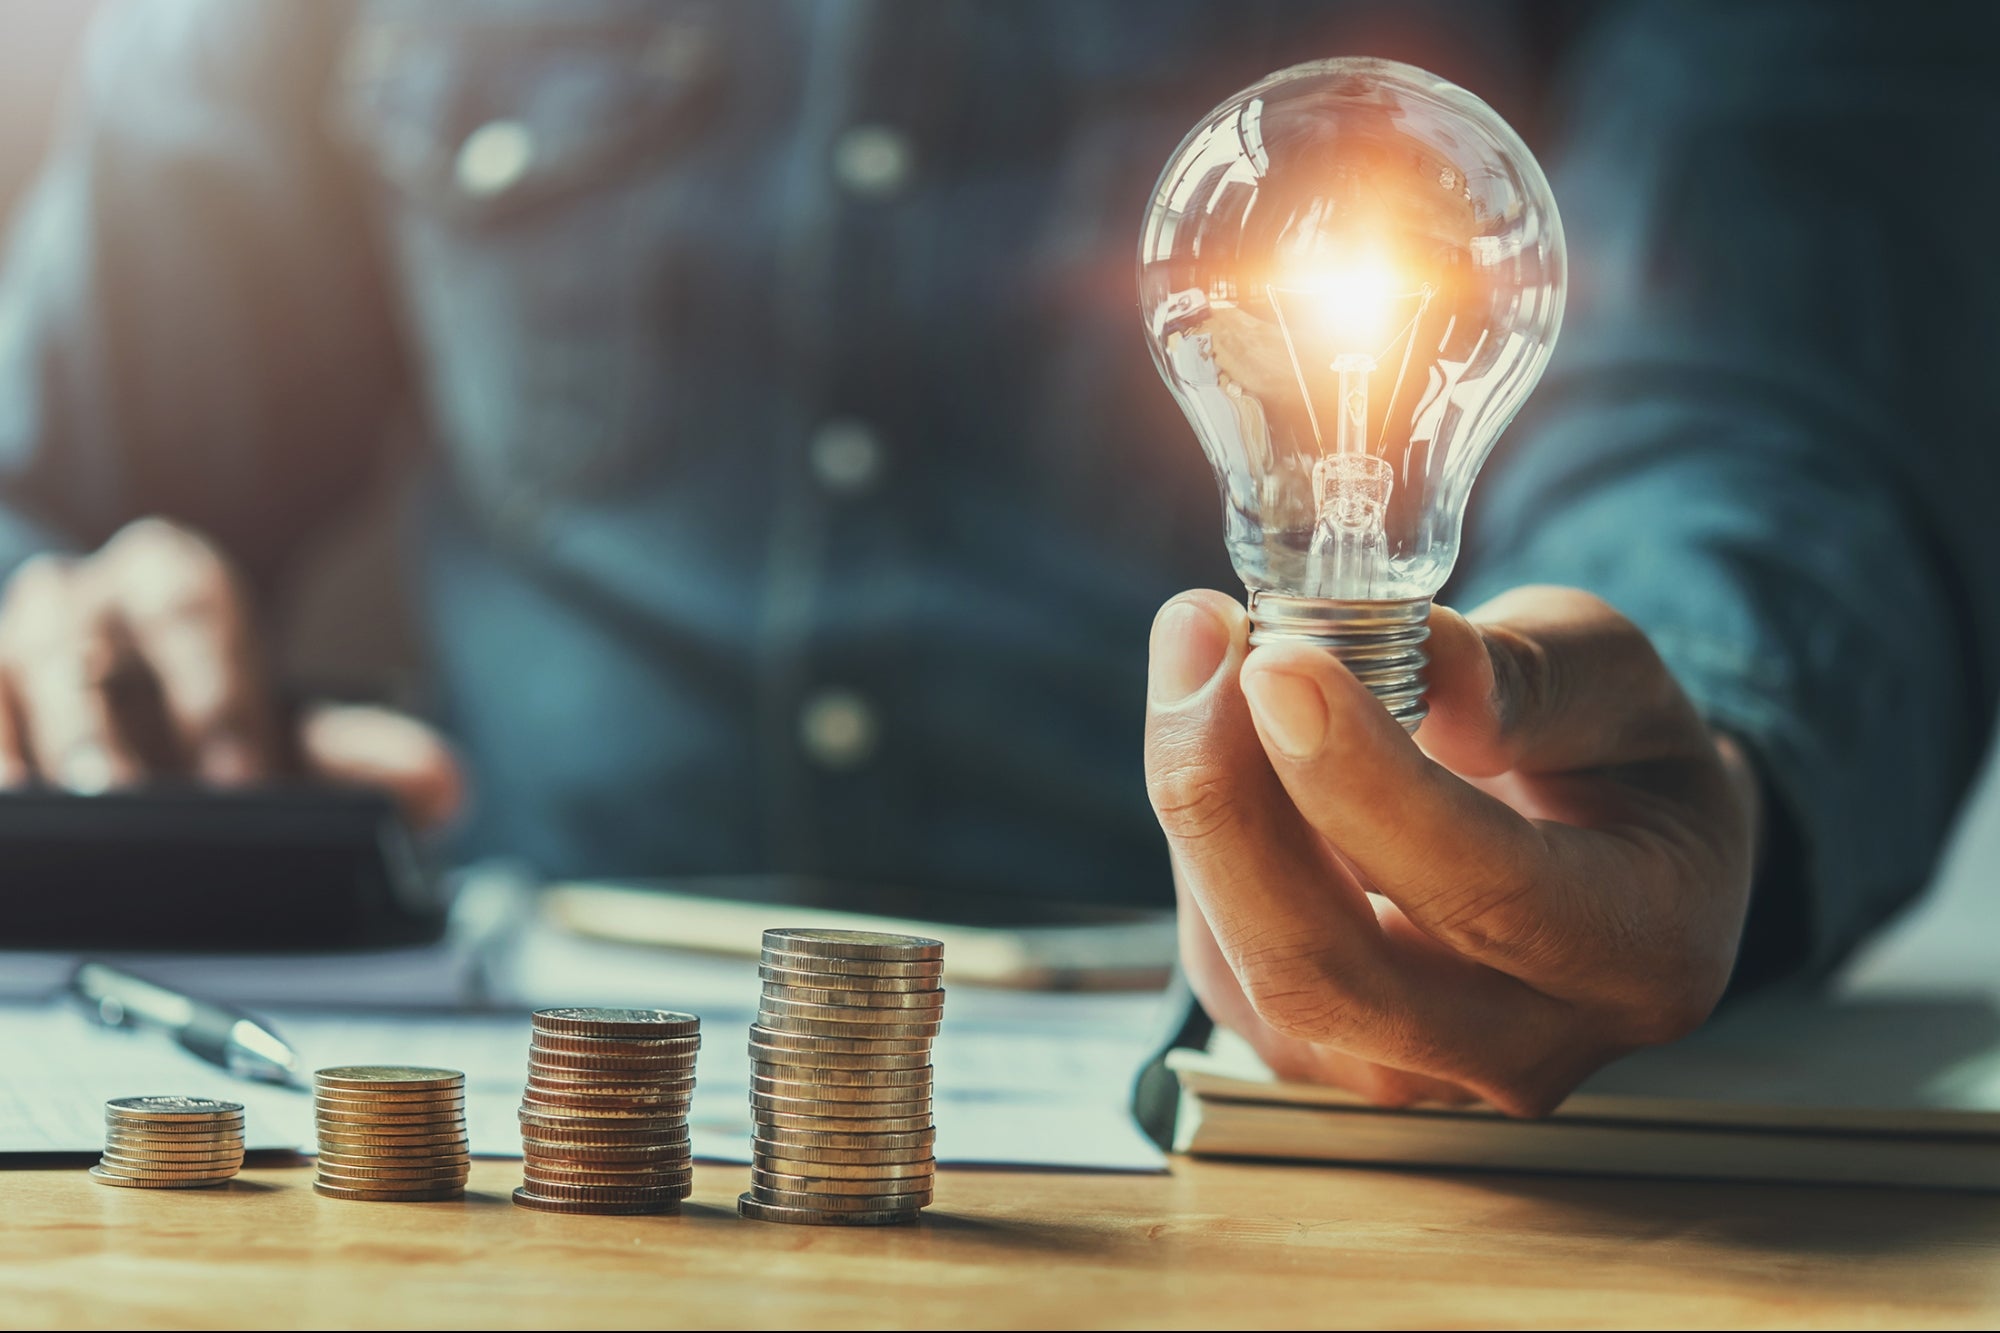 How To Raise Capital For A New Business Idea